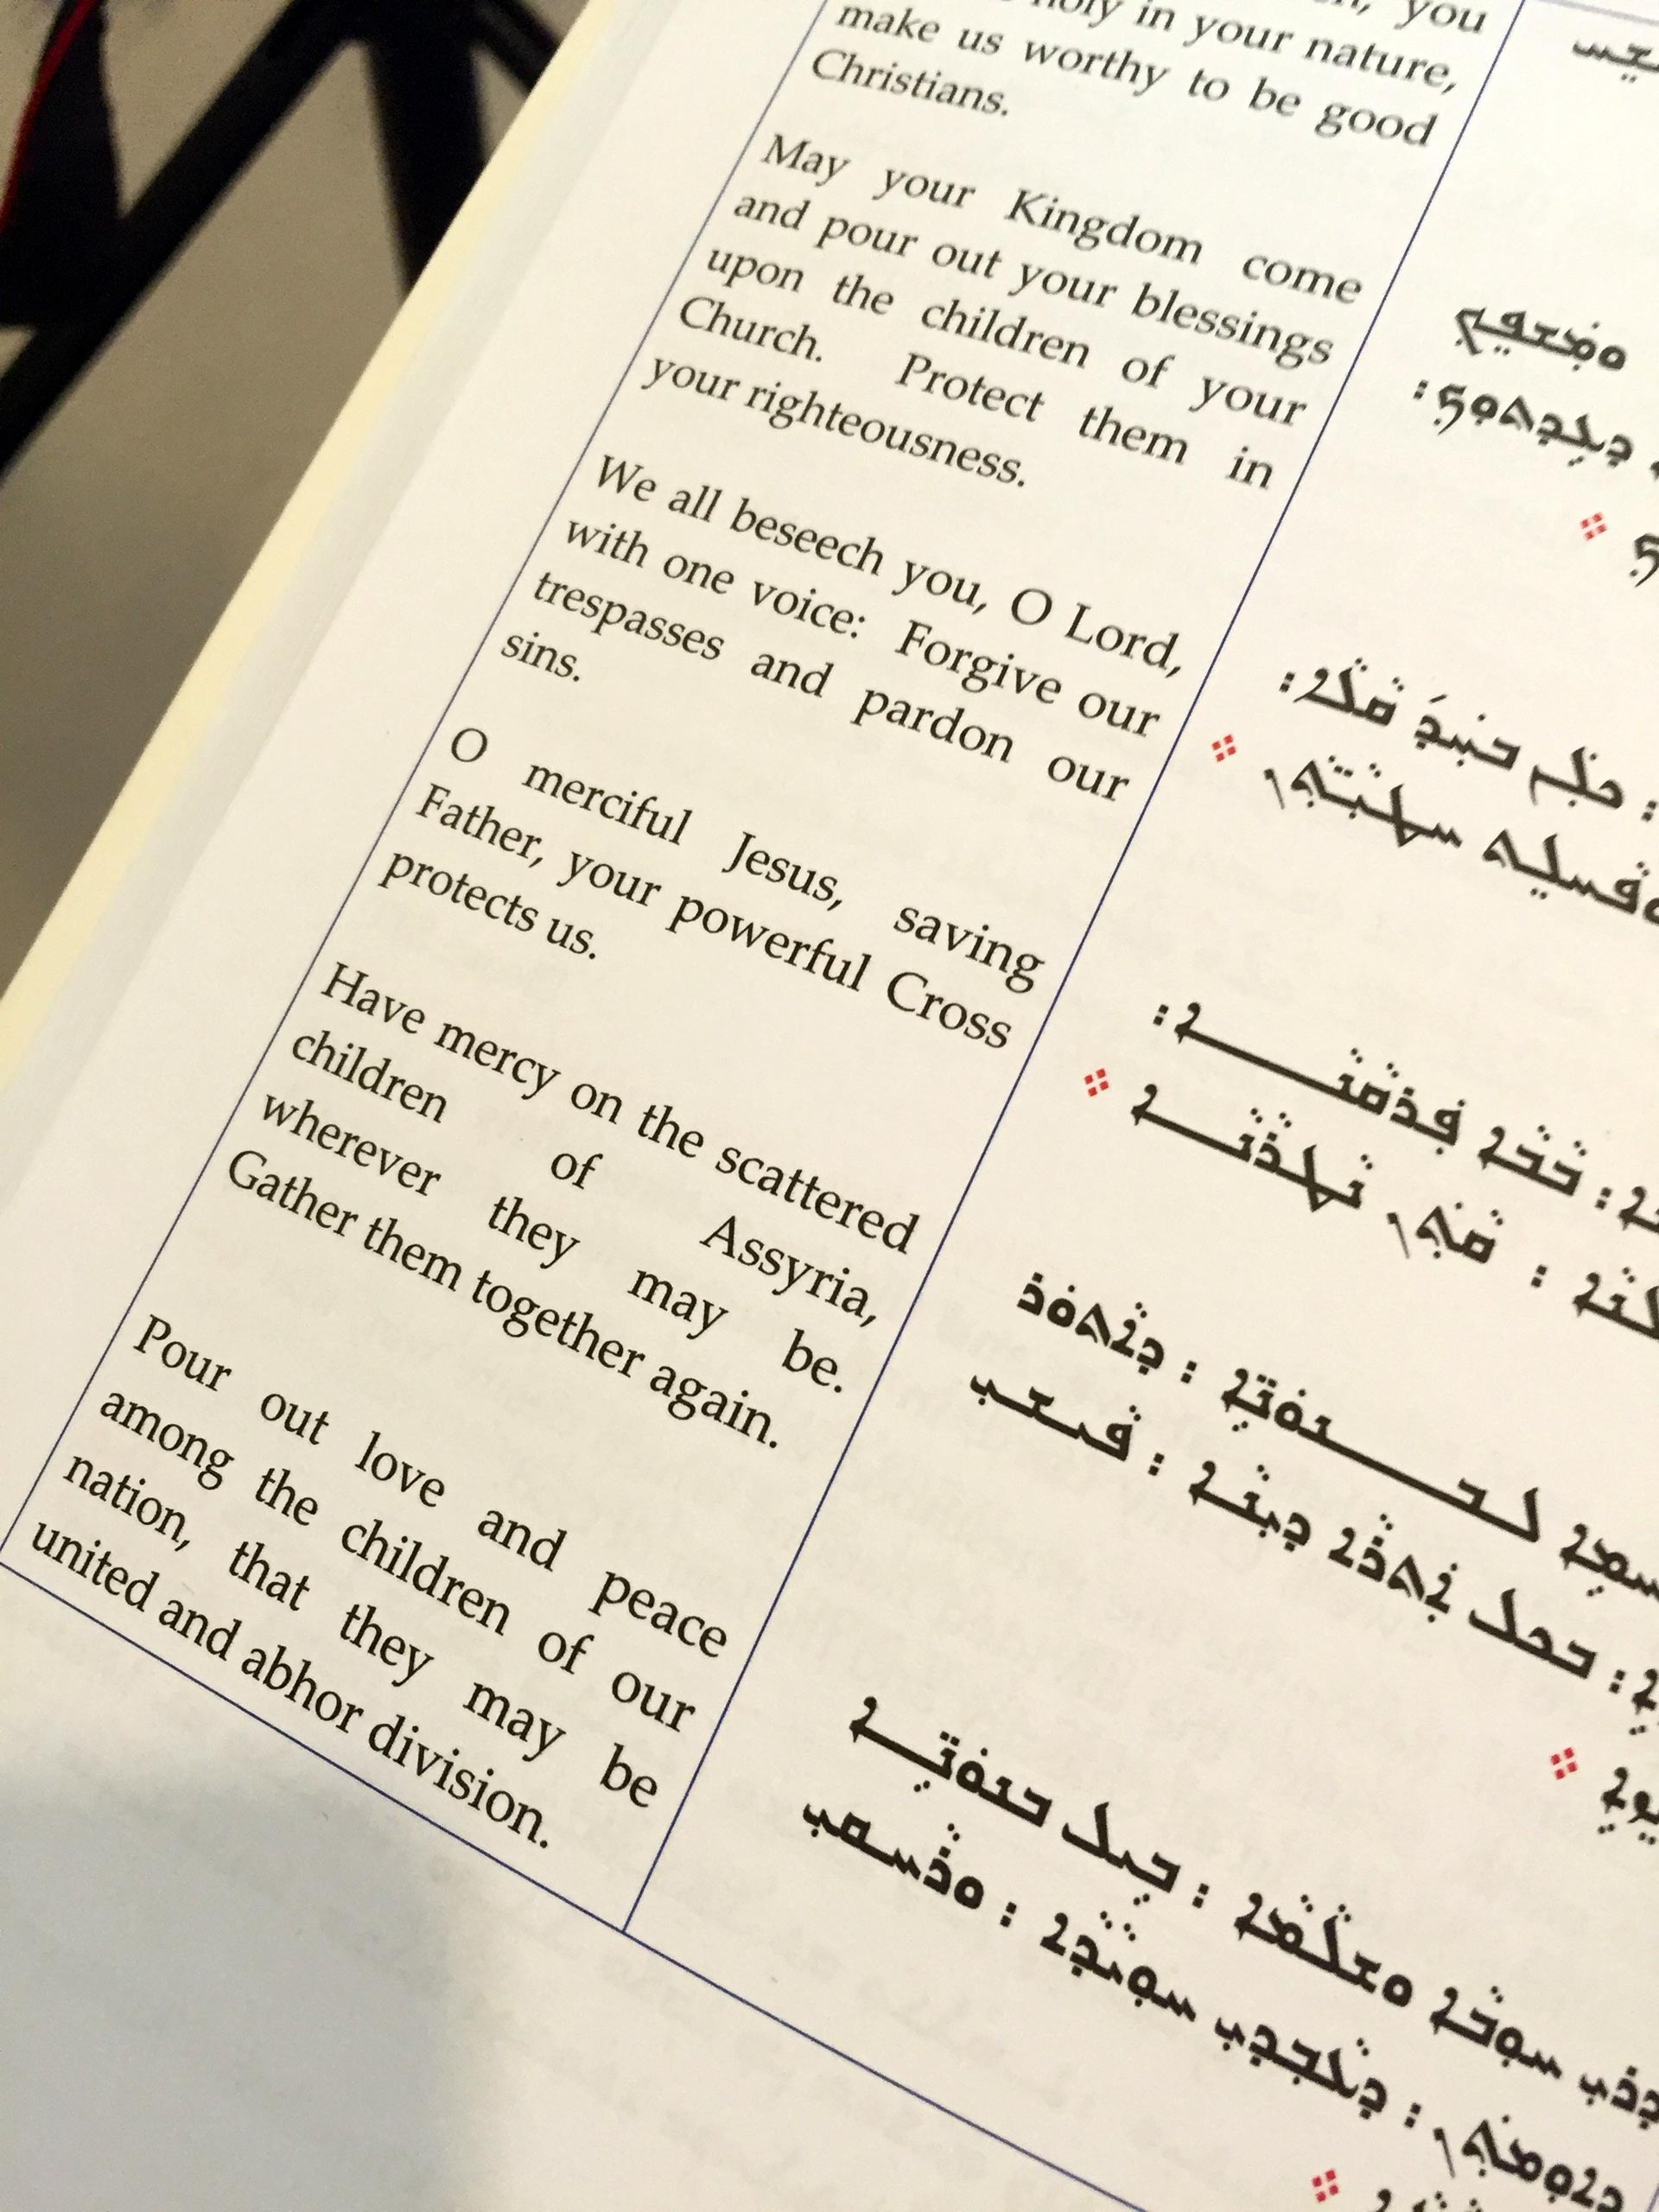 The Assyrian liturgy -- which has been used by the Assyrian Church of the East for nearly 2,000 years -- is printed in English and the Assyrian language.